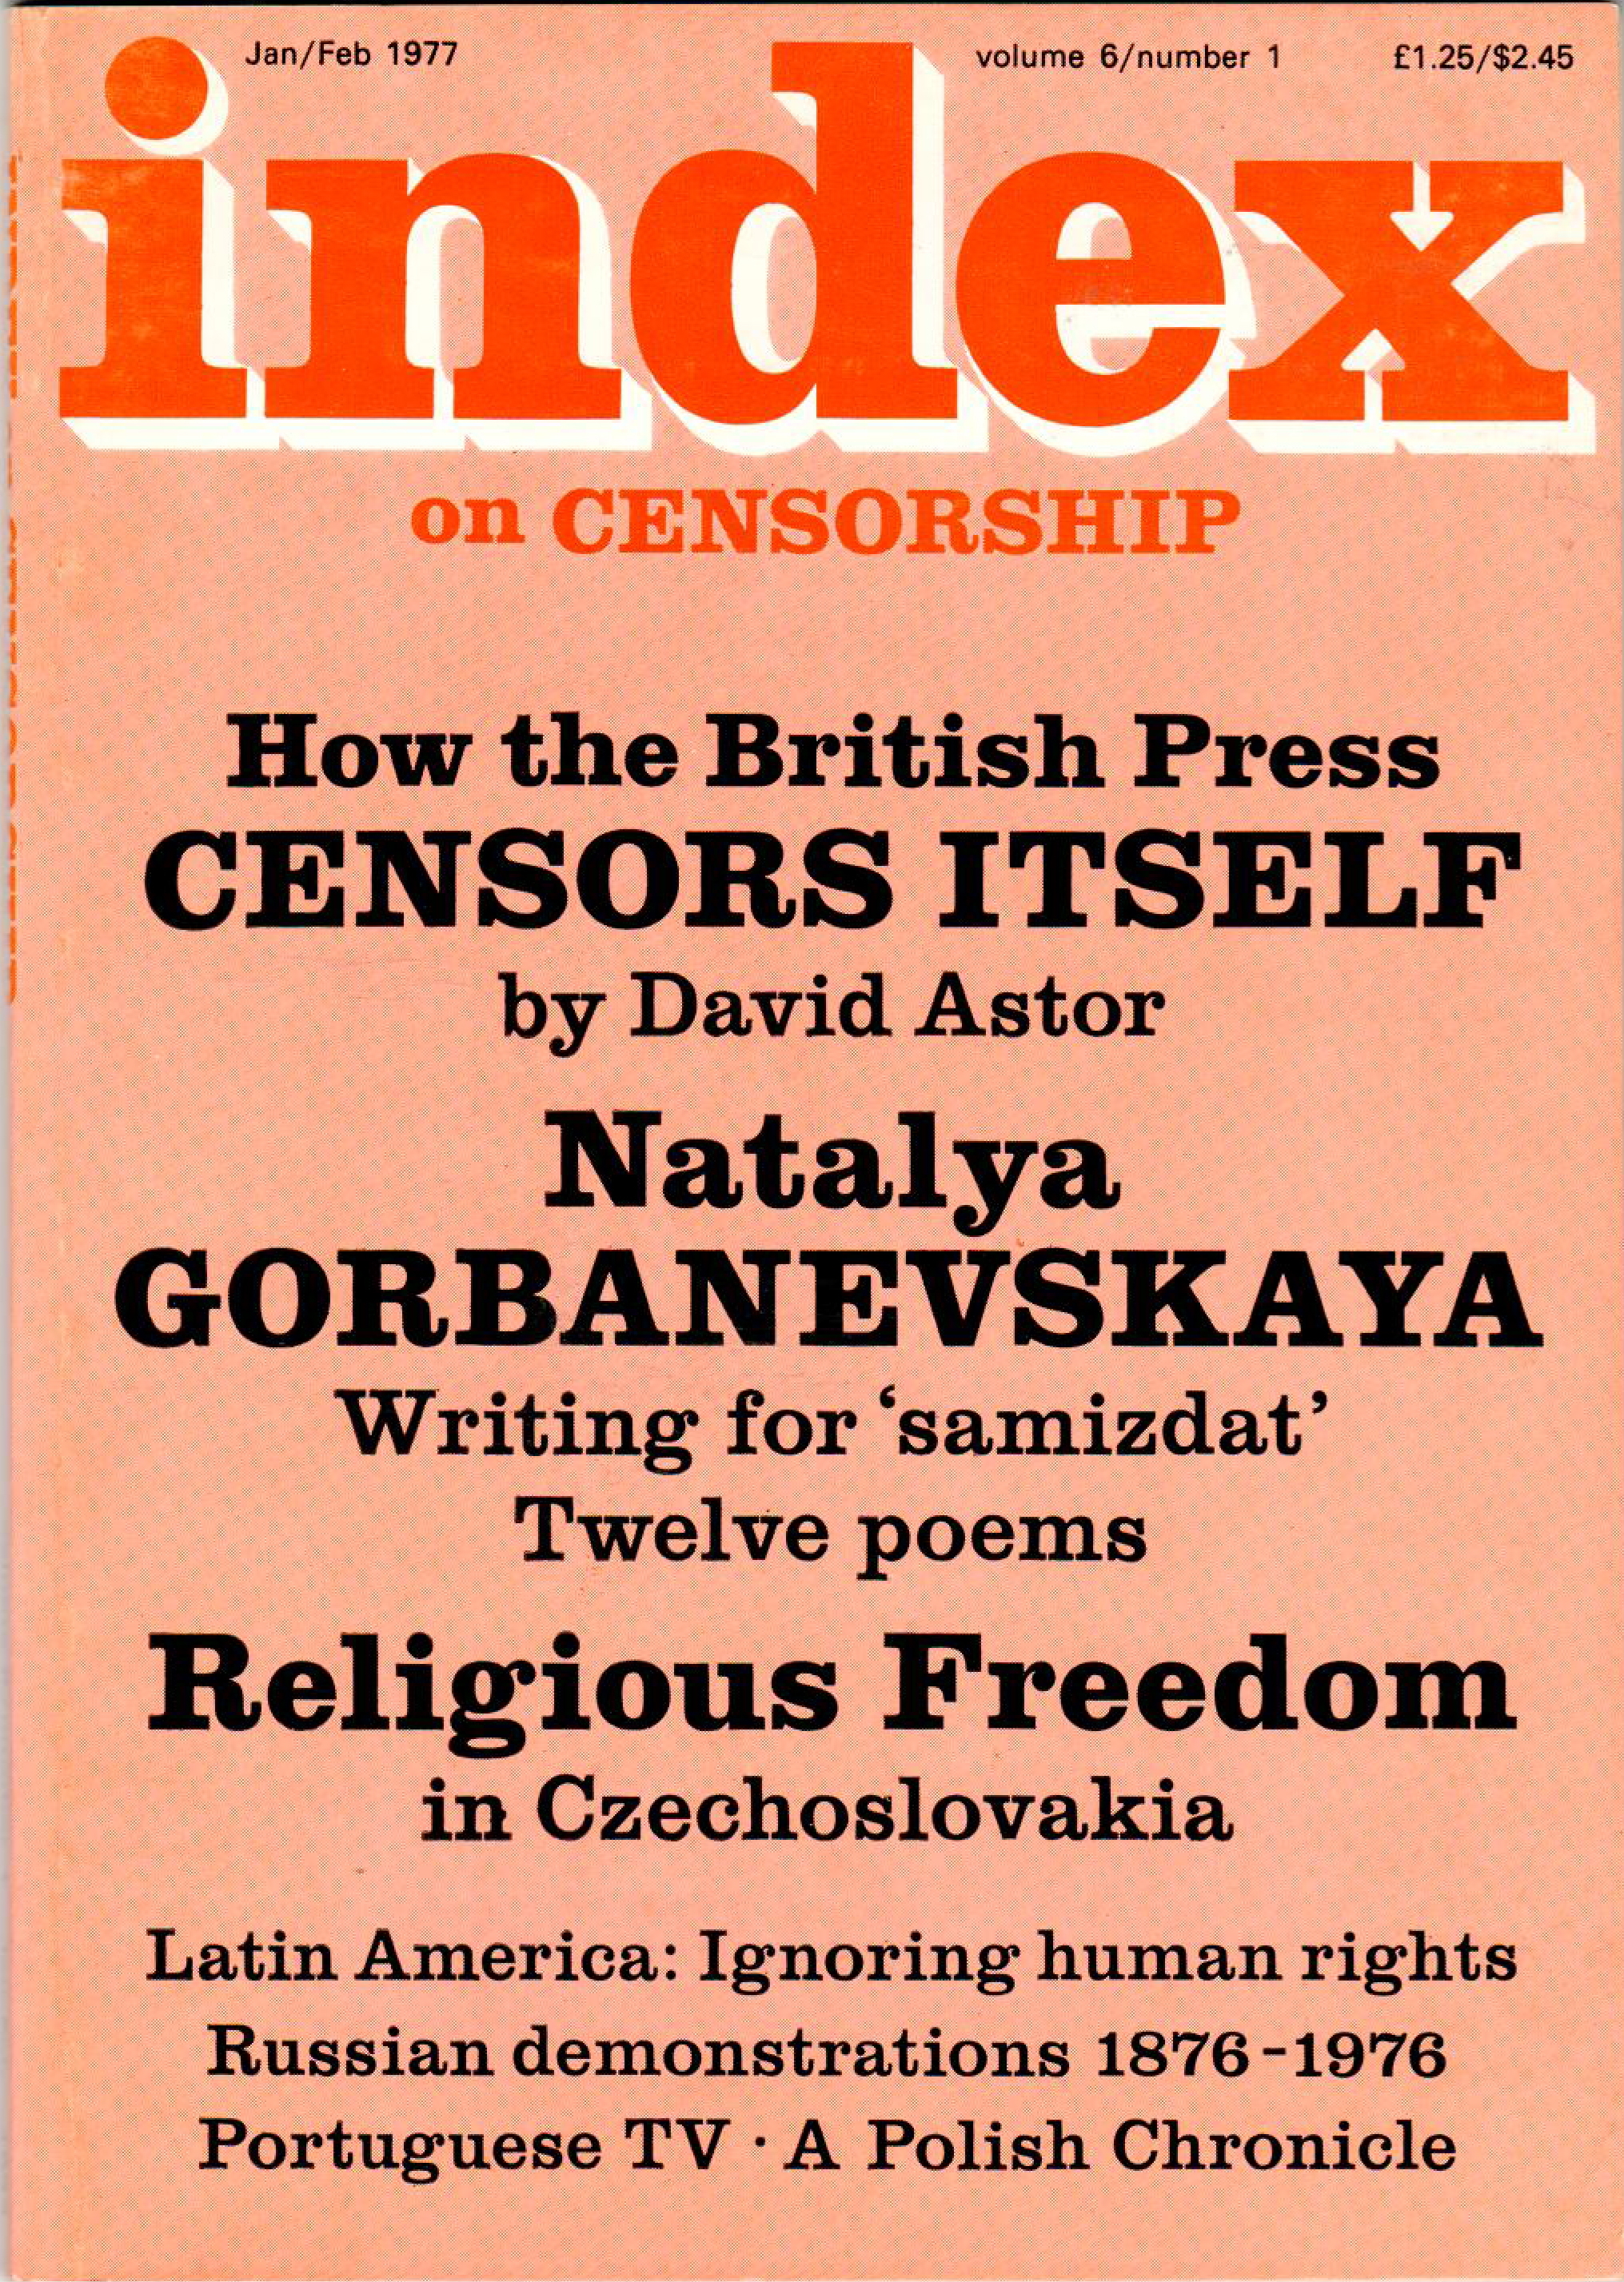 How the British press censors itself, the January 1977 issue of Index on Censorship magazine